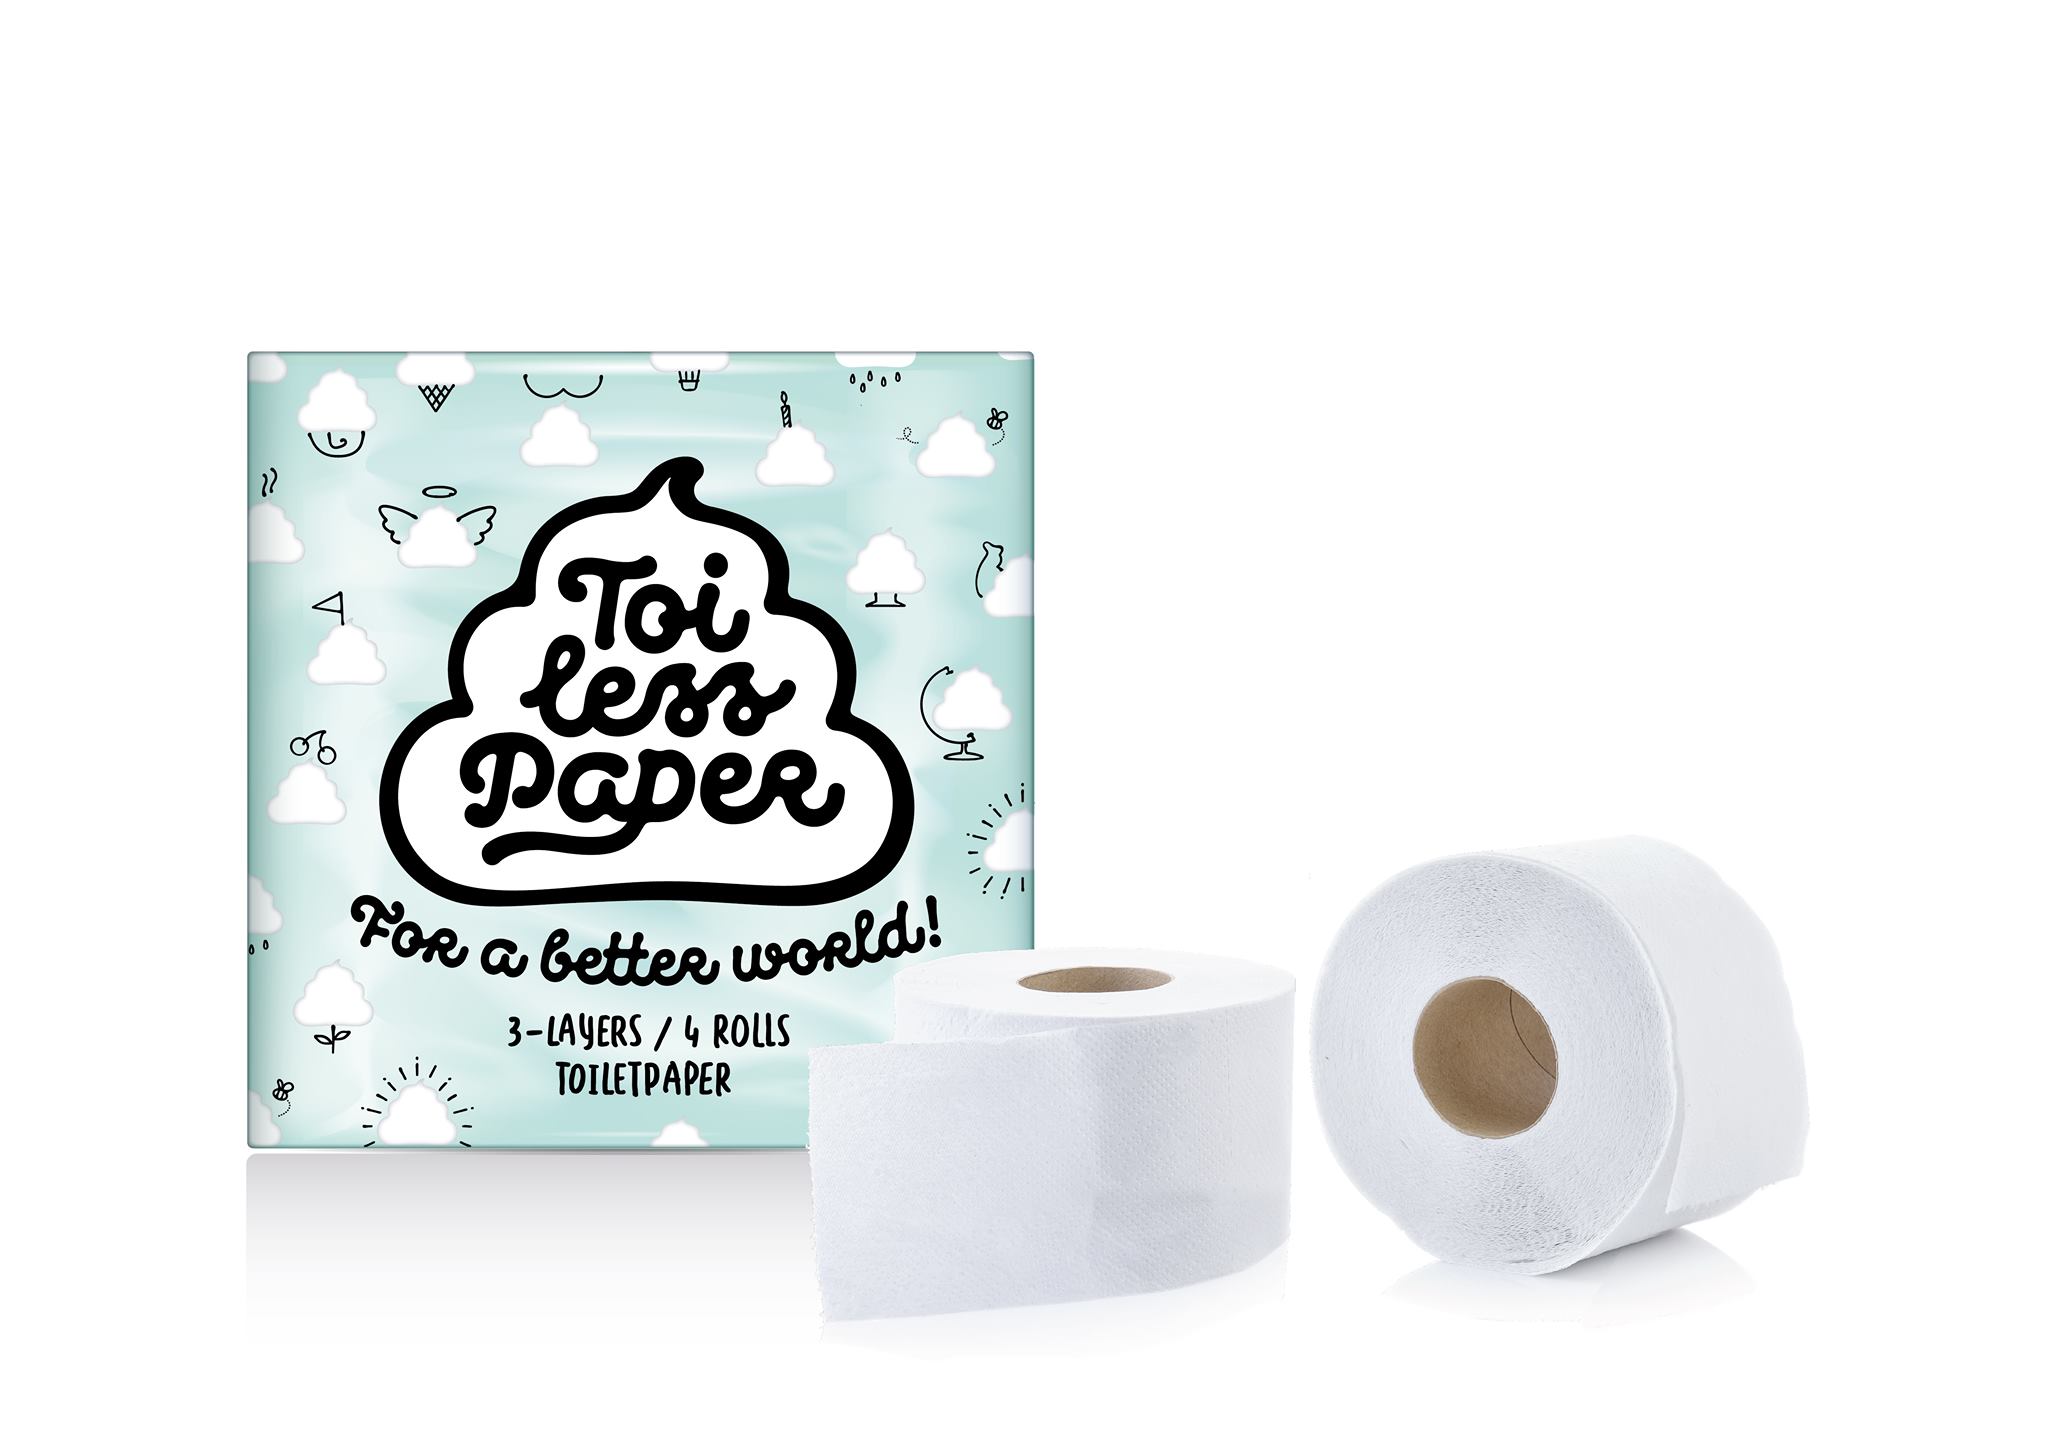 The most sustainable toiletpaper on the globe!